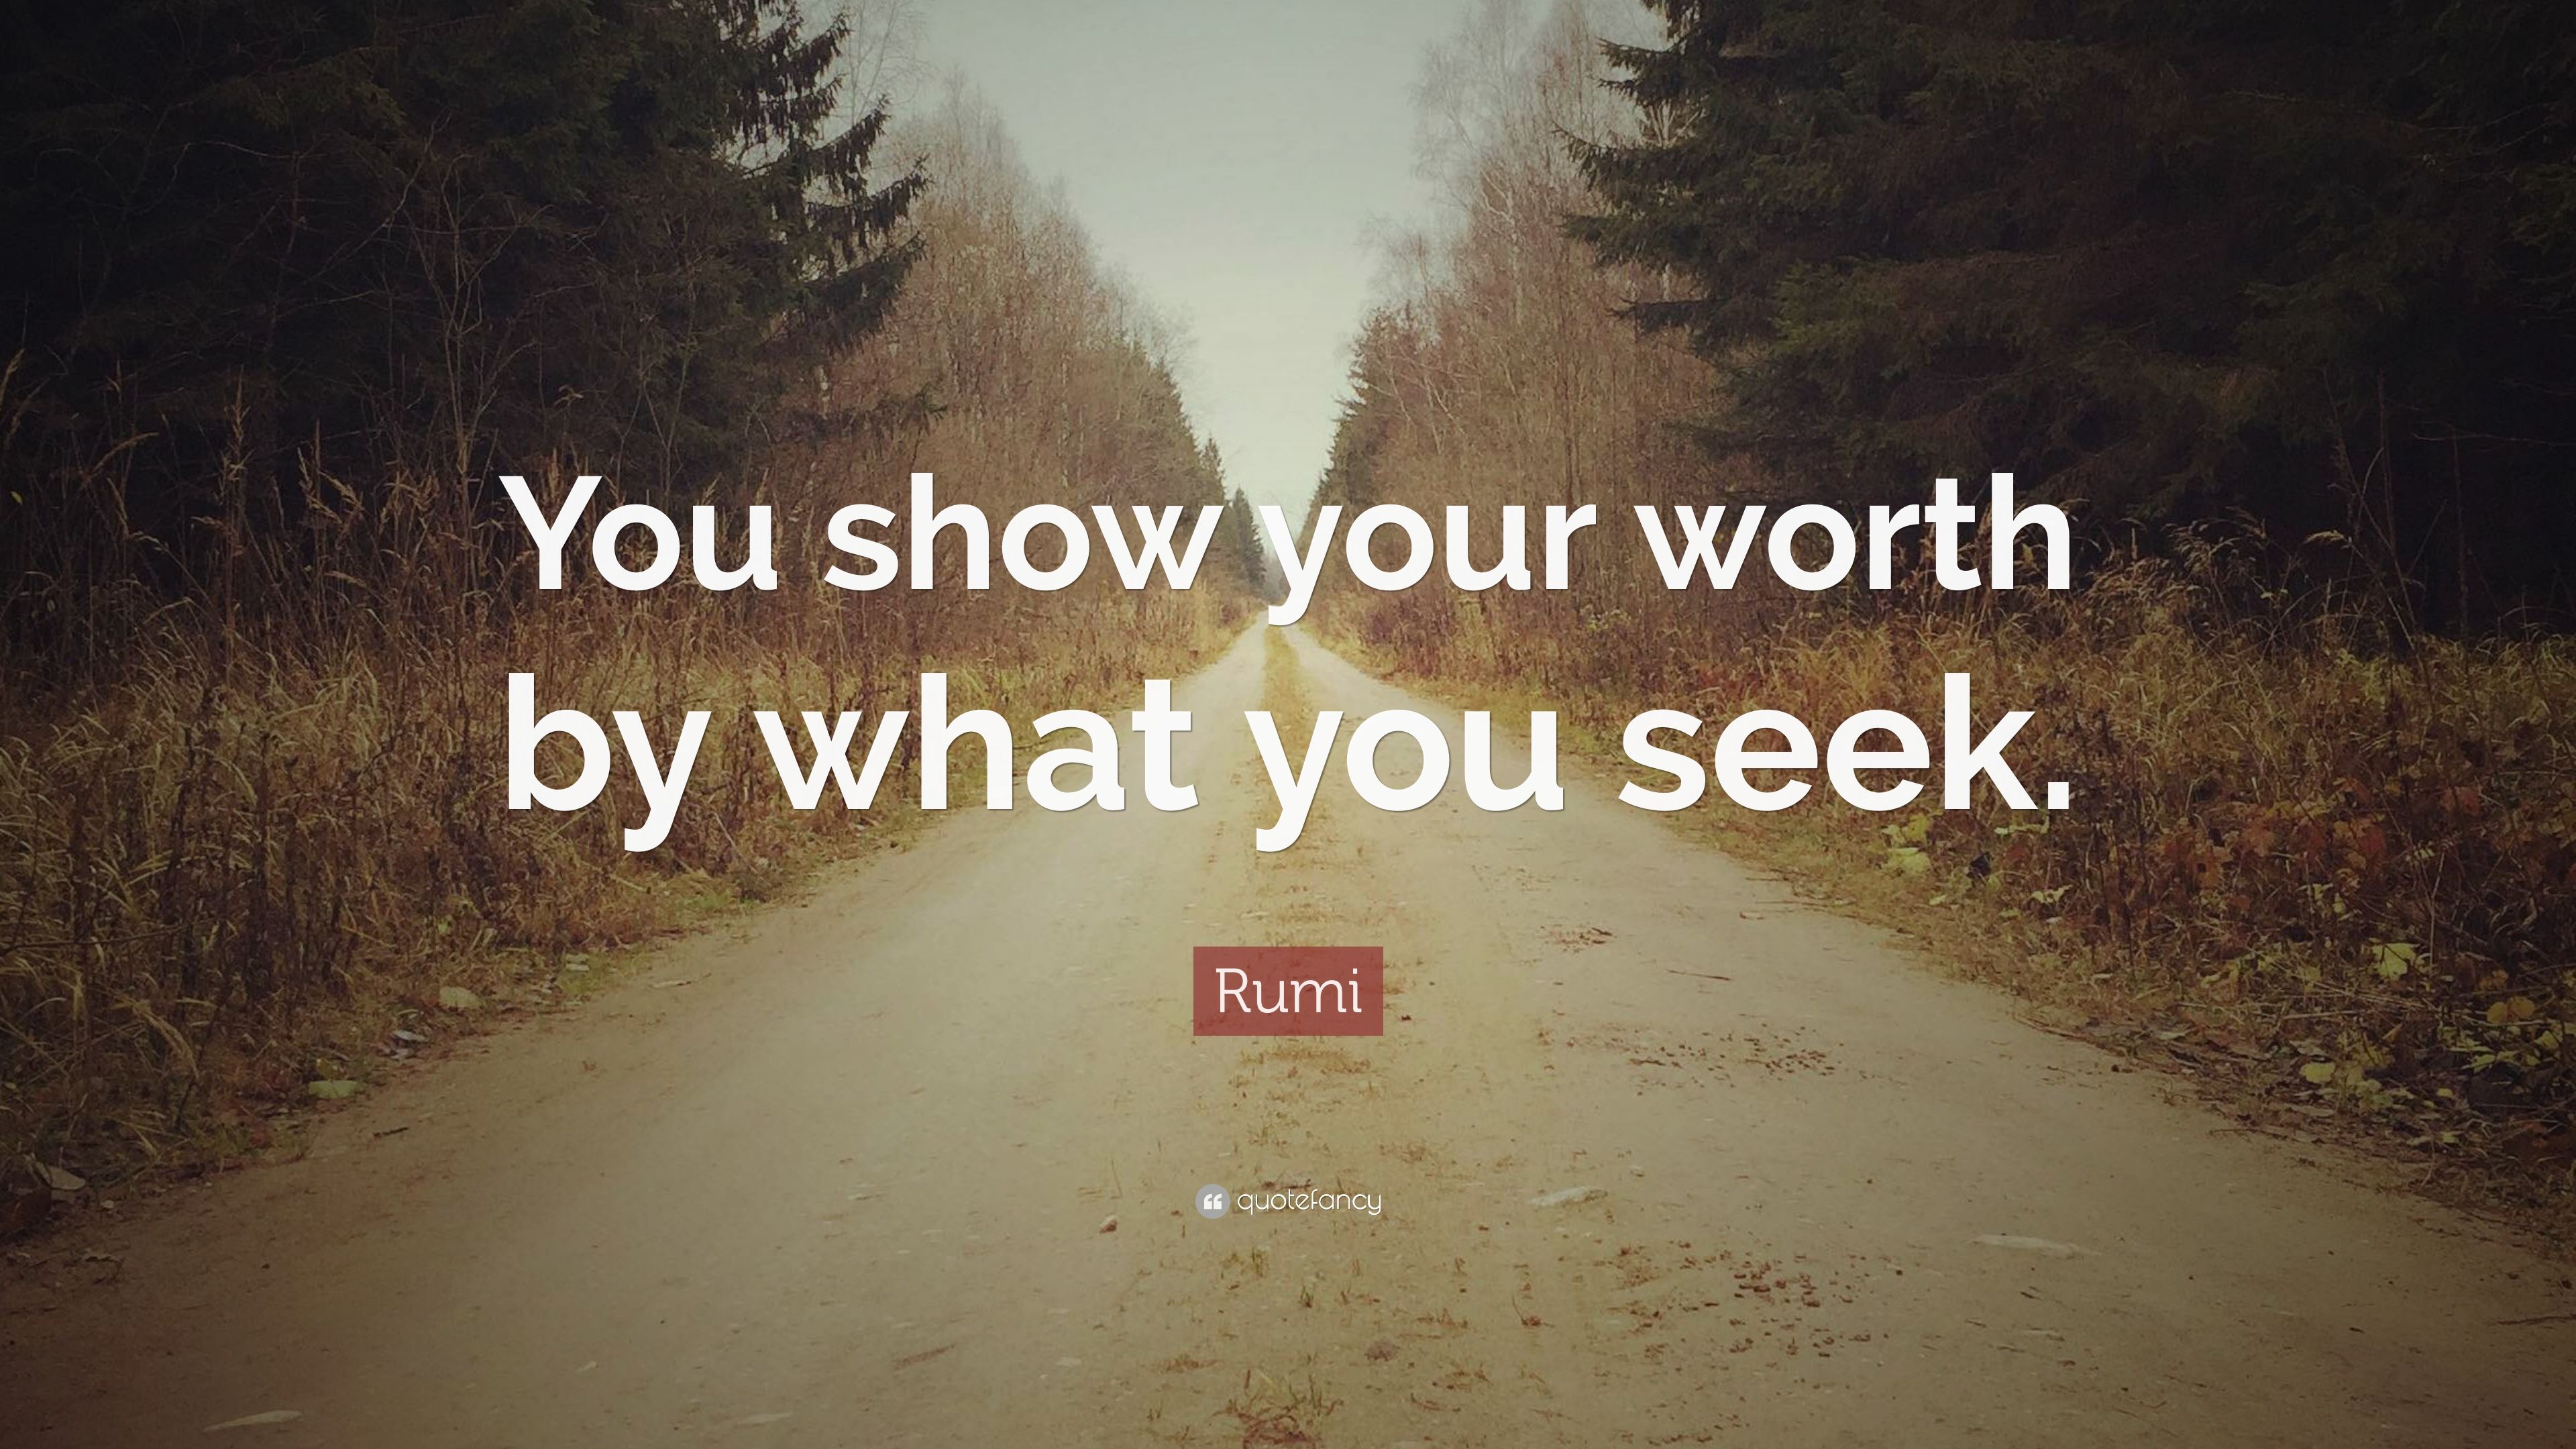 Rumi Quote: “You show your worth by what you seek.” 12 wallpaper